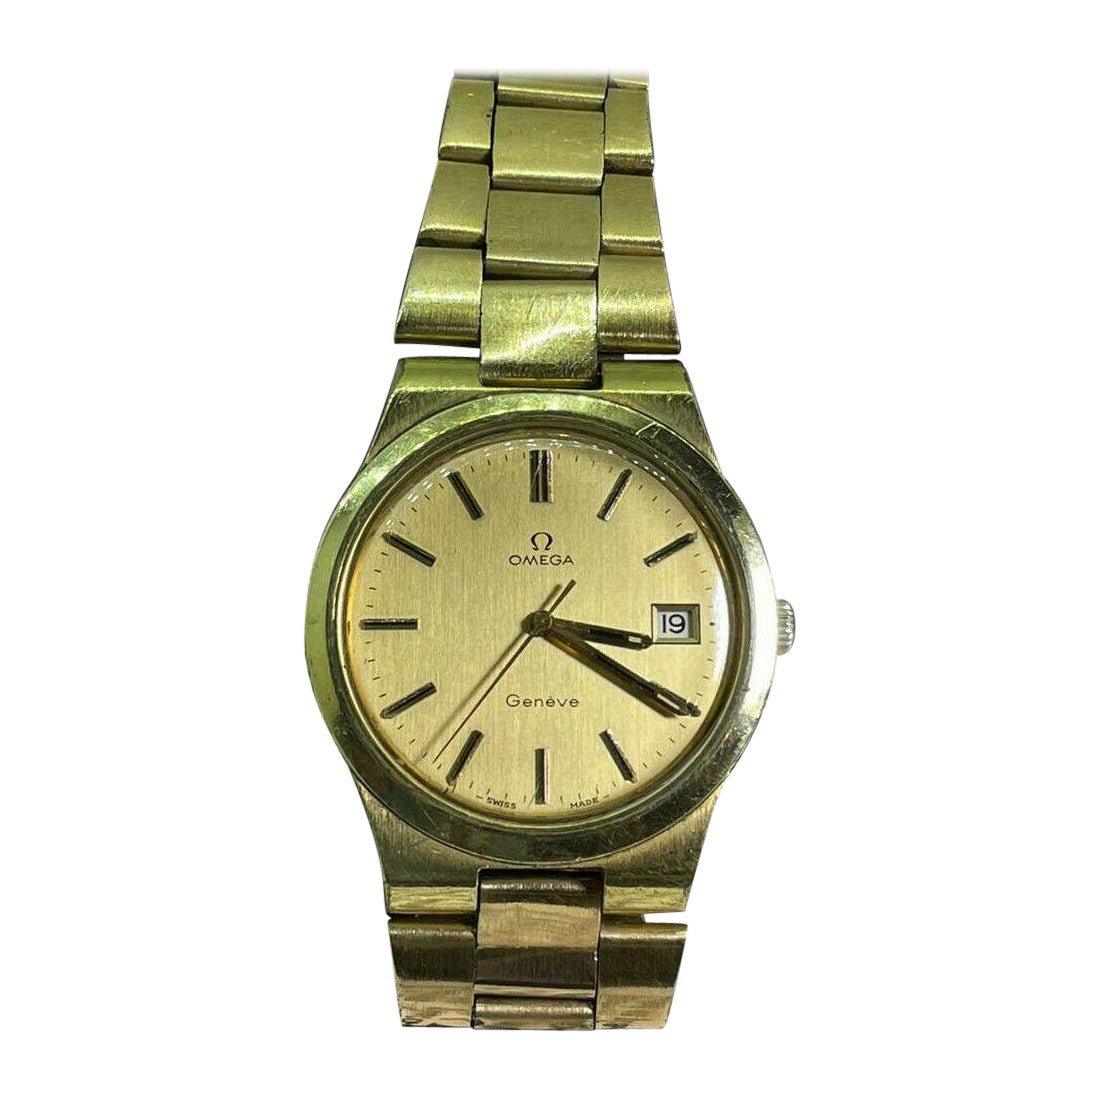 Vintage Omega Geneve Manual, cal 1030 Gold-Plated Gents' Watch, c1974. For Sale